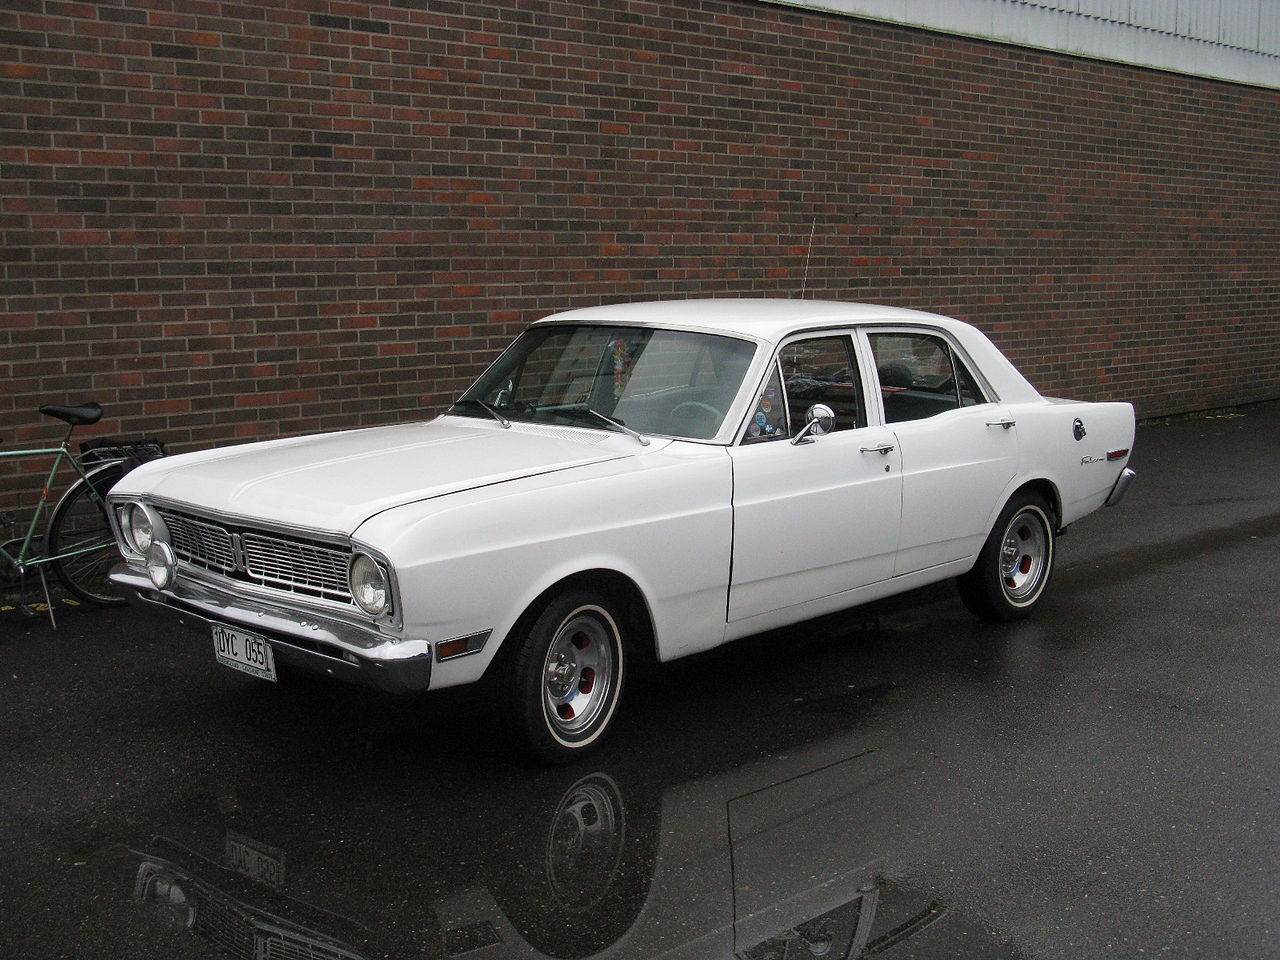 Image of Ford Falcon 1968 (7811027052)